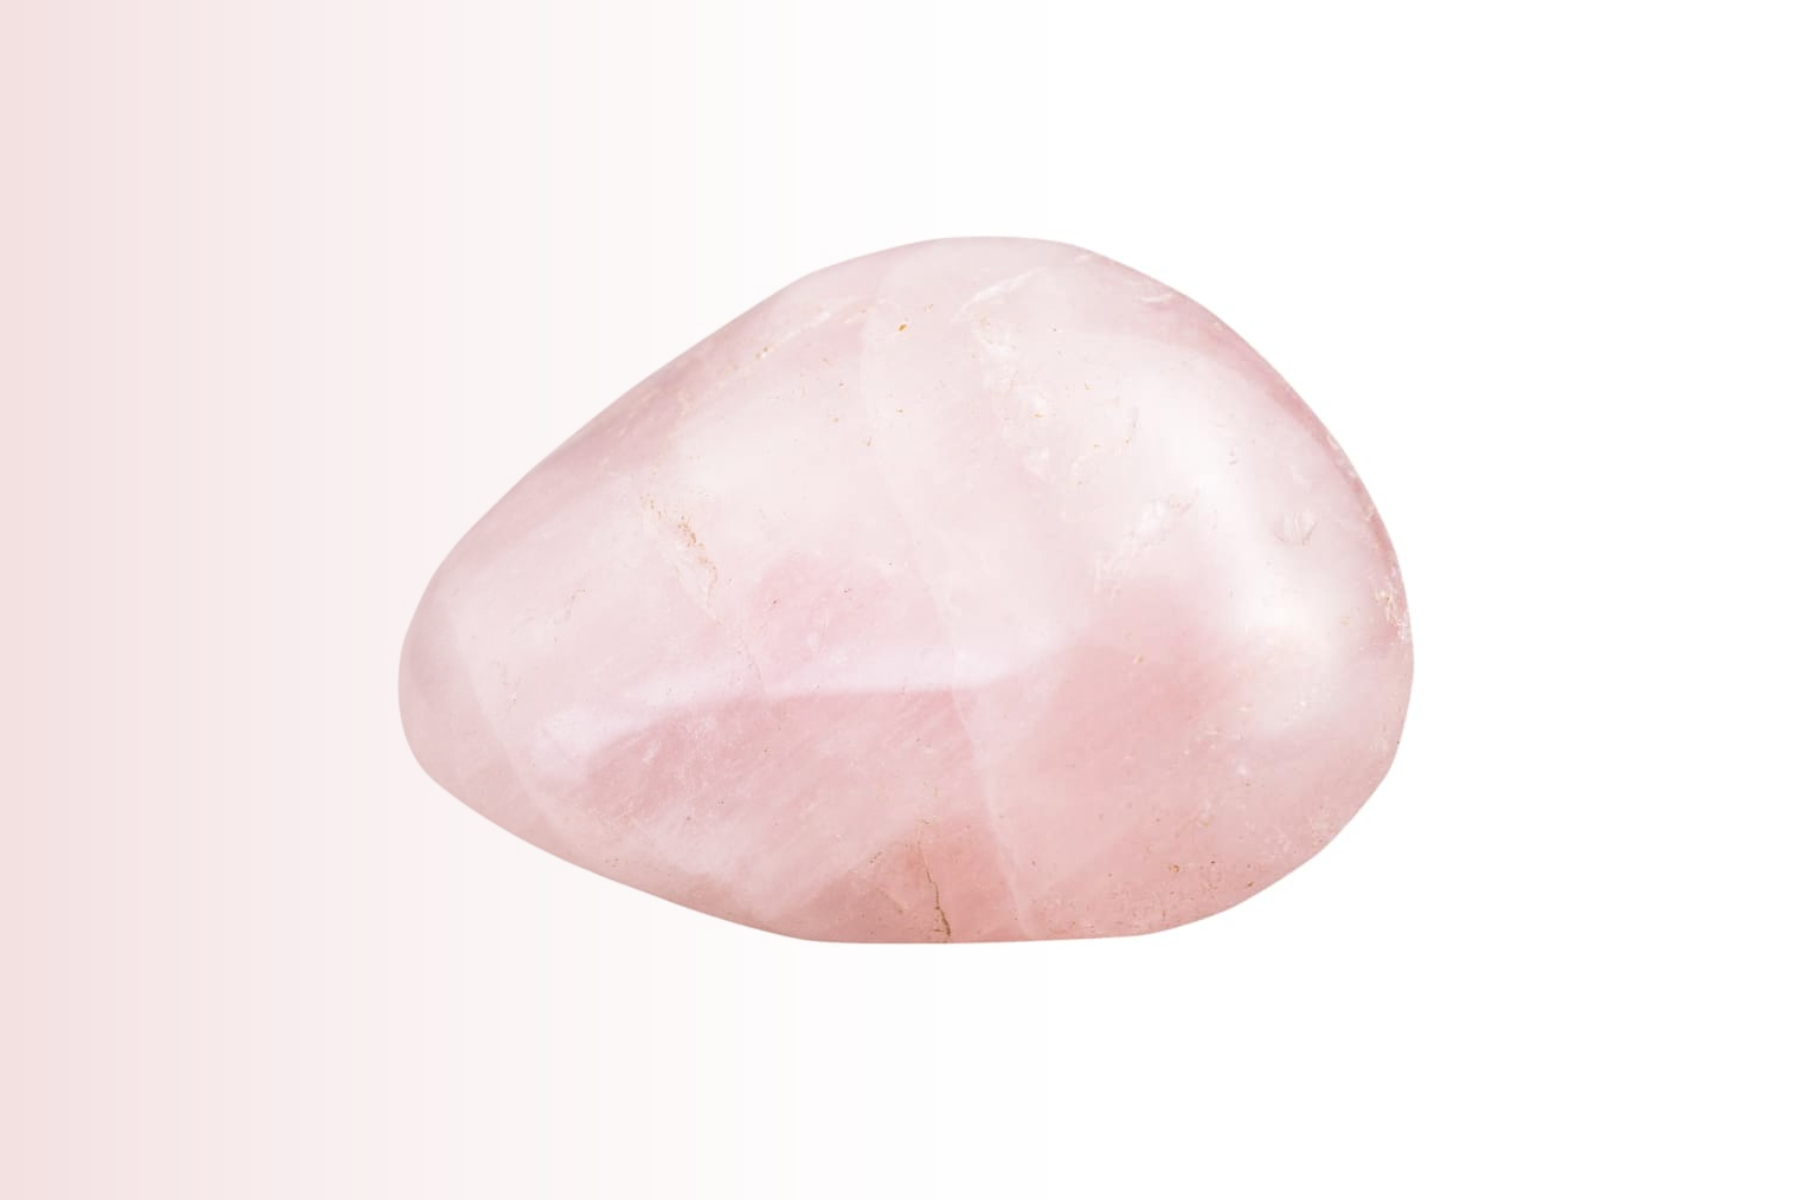 Rose quartz stone with a smoothed rock formation